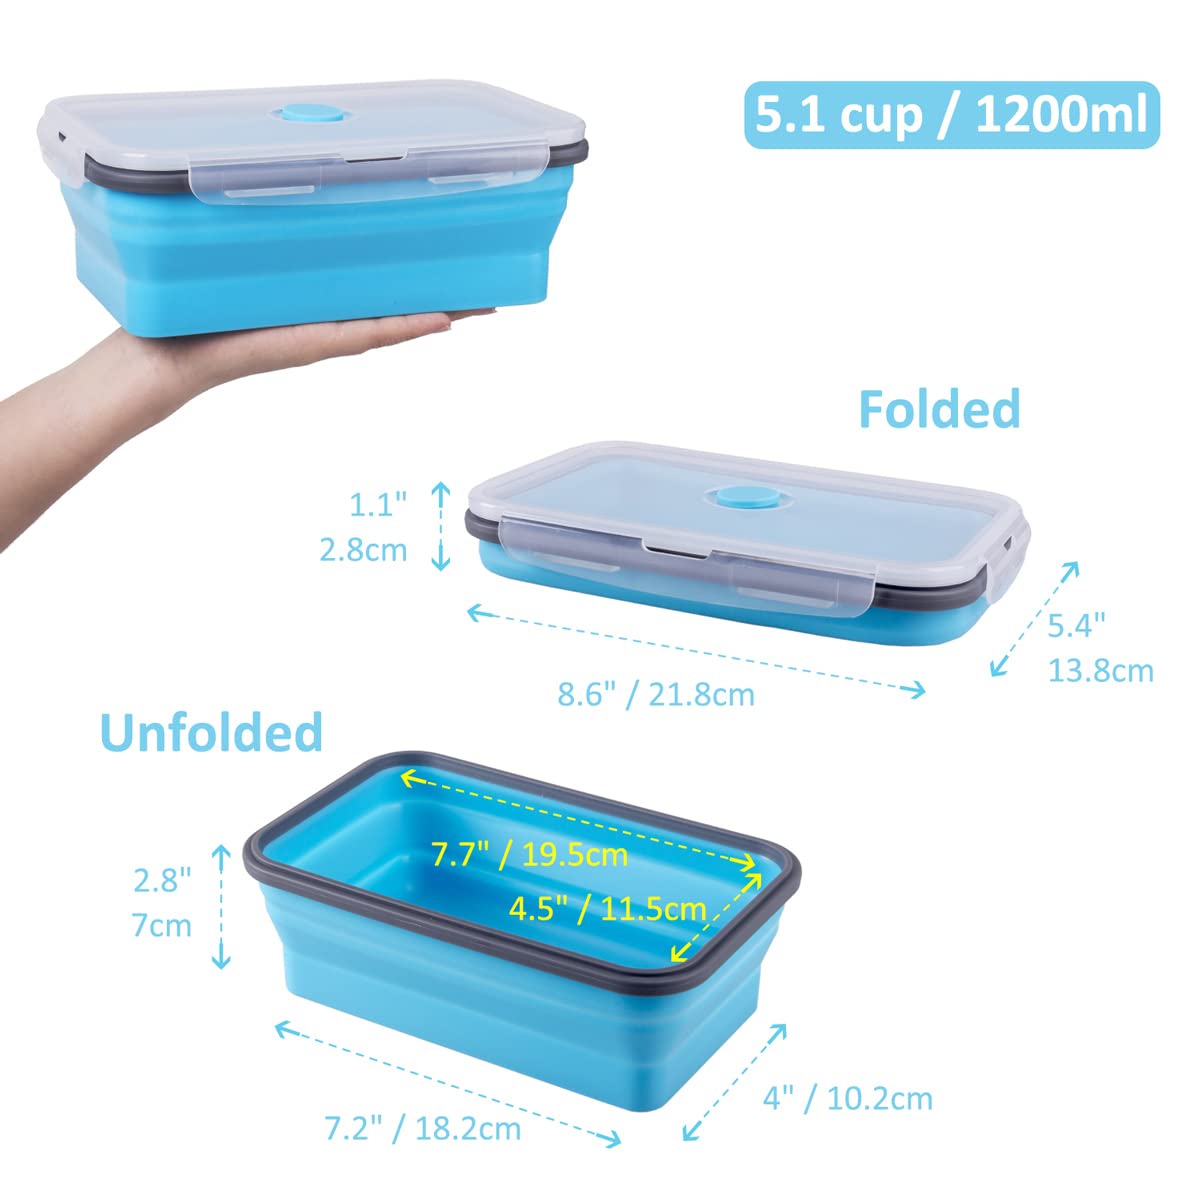 Annaklin Collapsible Food Storage Containers with Lid, Bundle of 3 Sizes, 12 Pack, Kitchen Stacking Silicone Collapsible Meal Prep Container Set for Leftover, Microwave Freezer Dishwasher Safe, Blue